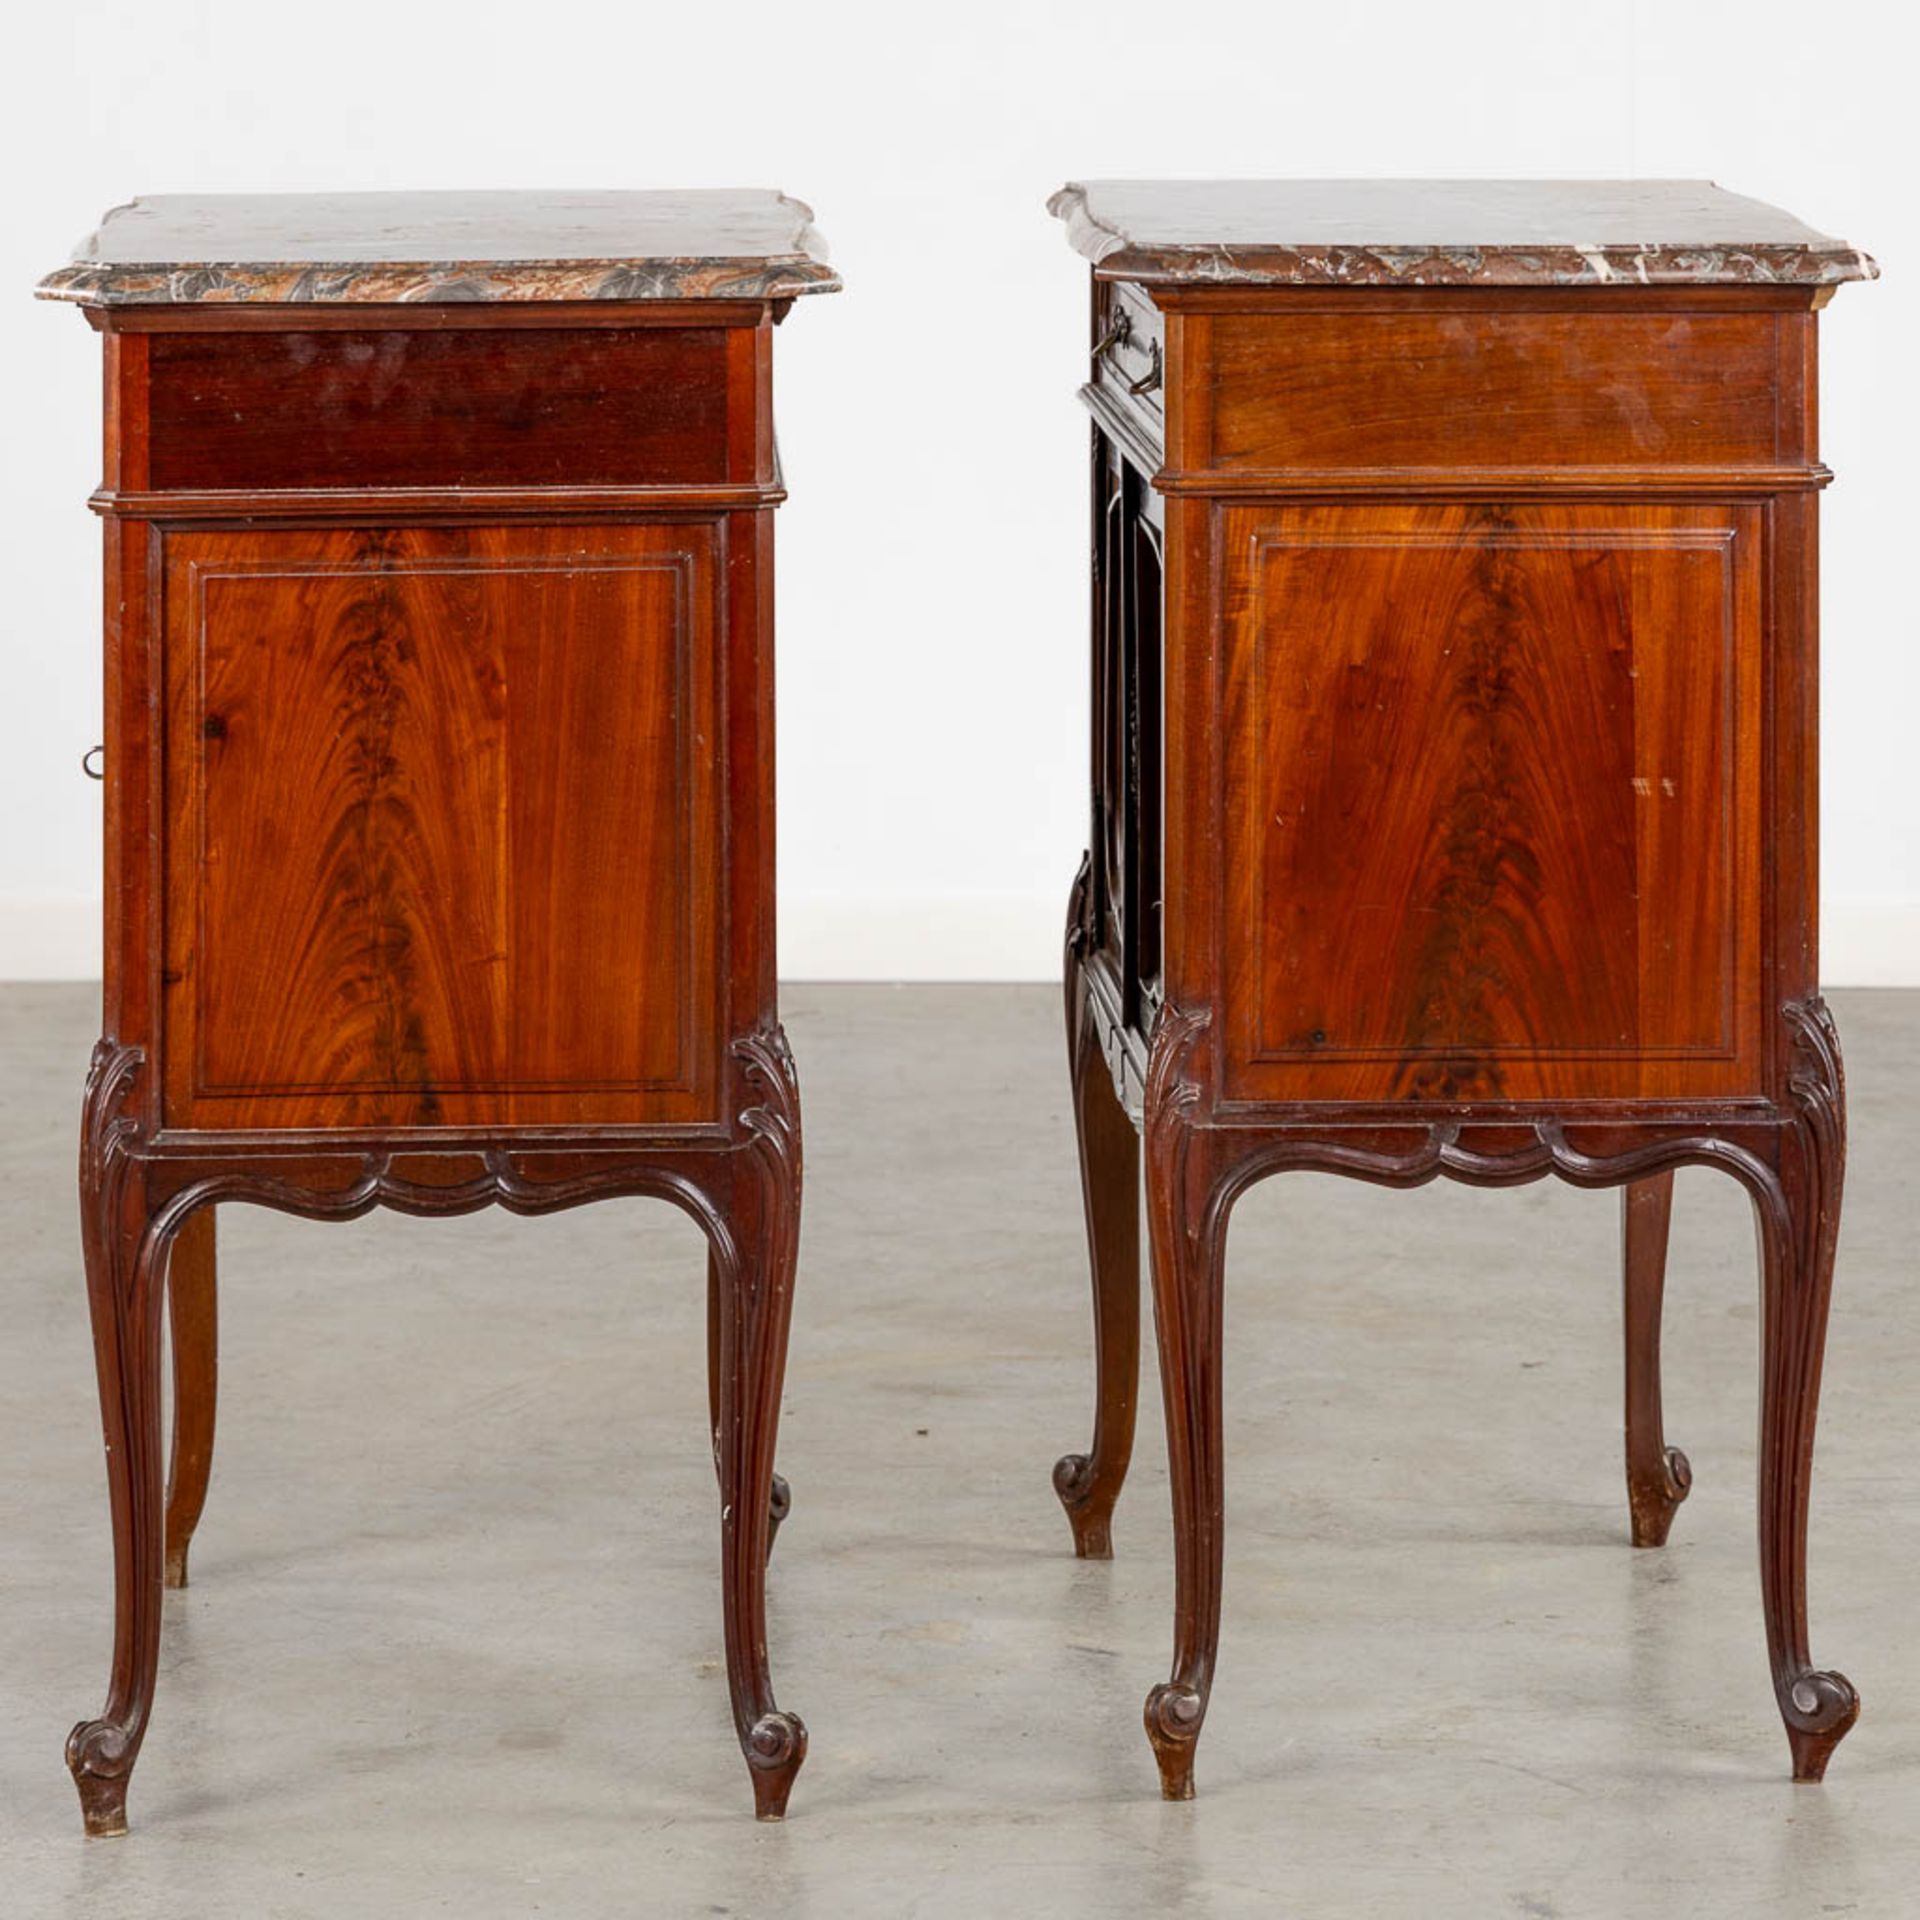 A pair of sculptured mahogany cabinets with a marble top, Louis XV style. (L:41 x W:63 x H:80 cm) - Bild 5 aus 15